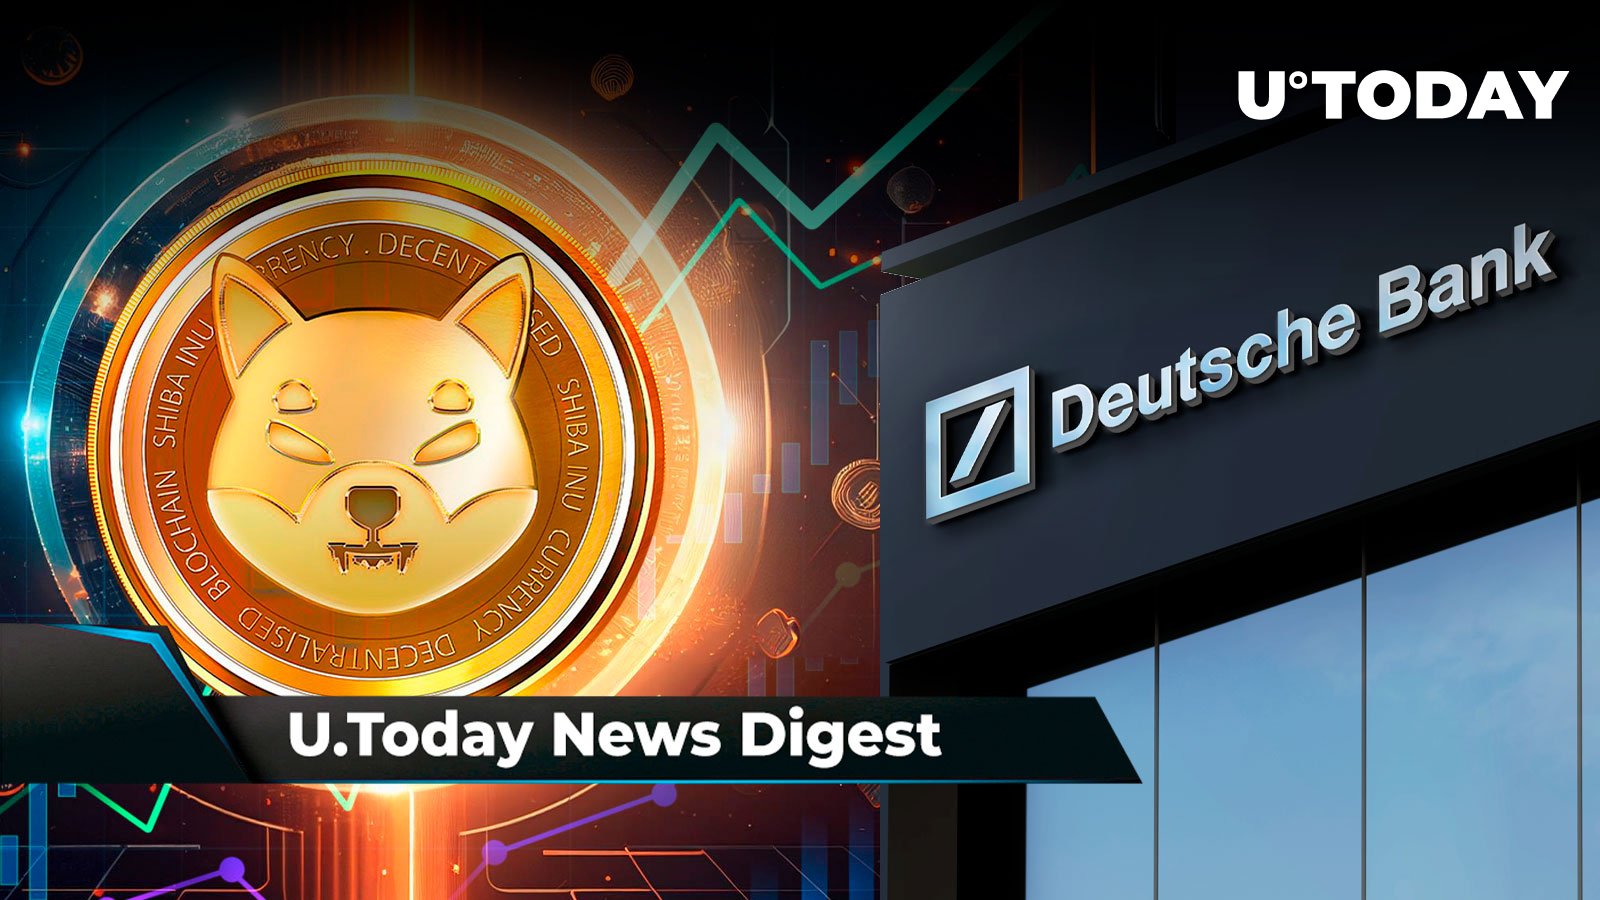 deutsche-bank-makes-major-u-turn-on-crypto-shibarium-daily-transactions-jump-to-200-000-ripple-and-tranglo-set-sights-on-three-asian-countries-crypto-news-digest-by-u-today